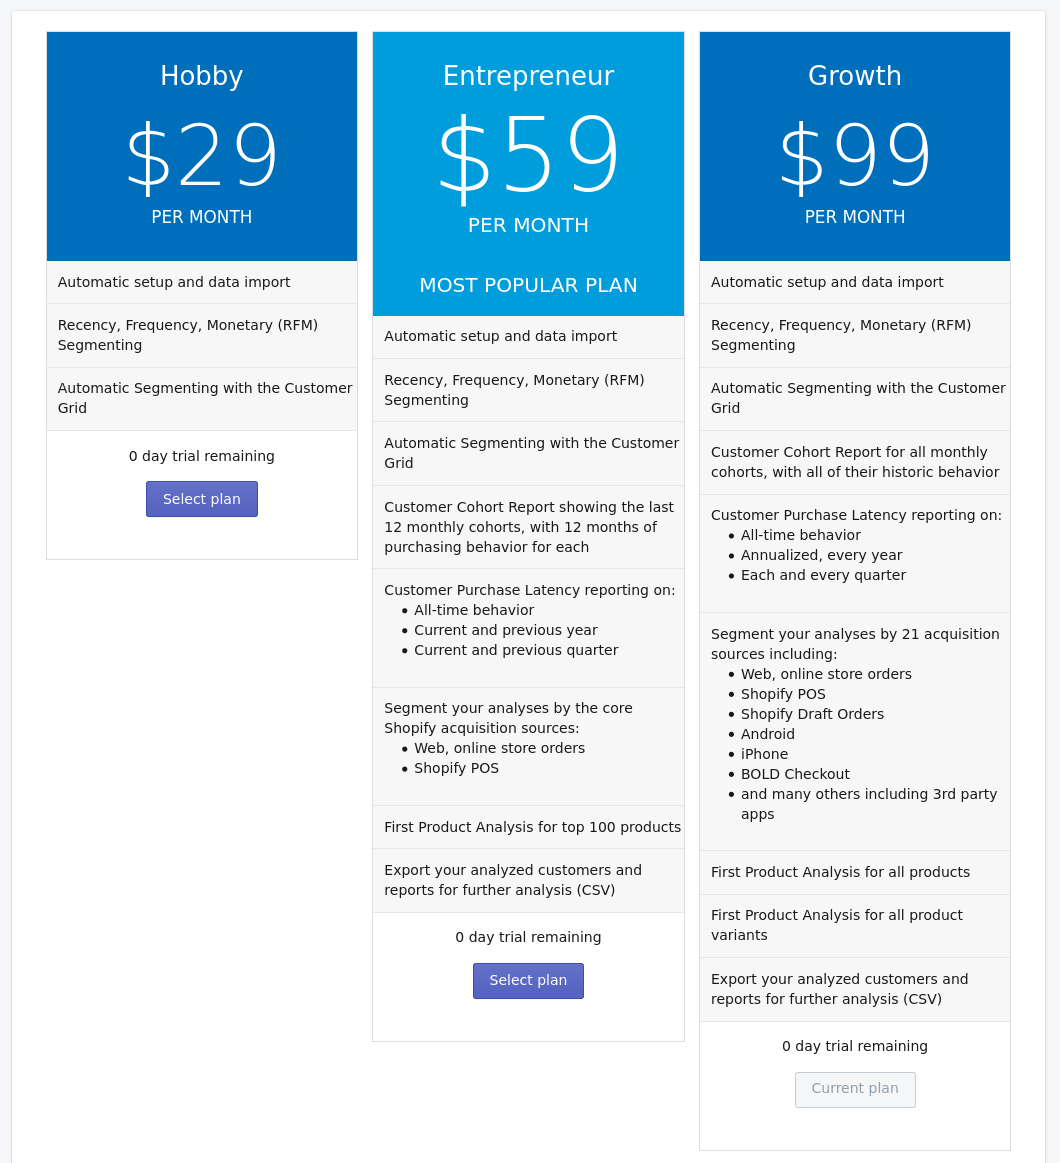 Repeat Customer Insights pricing plans